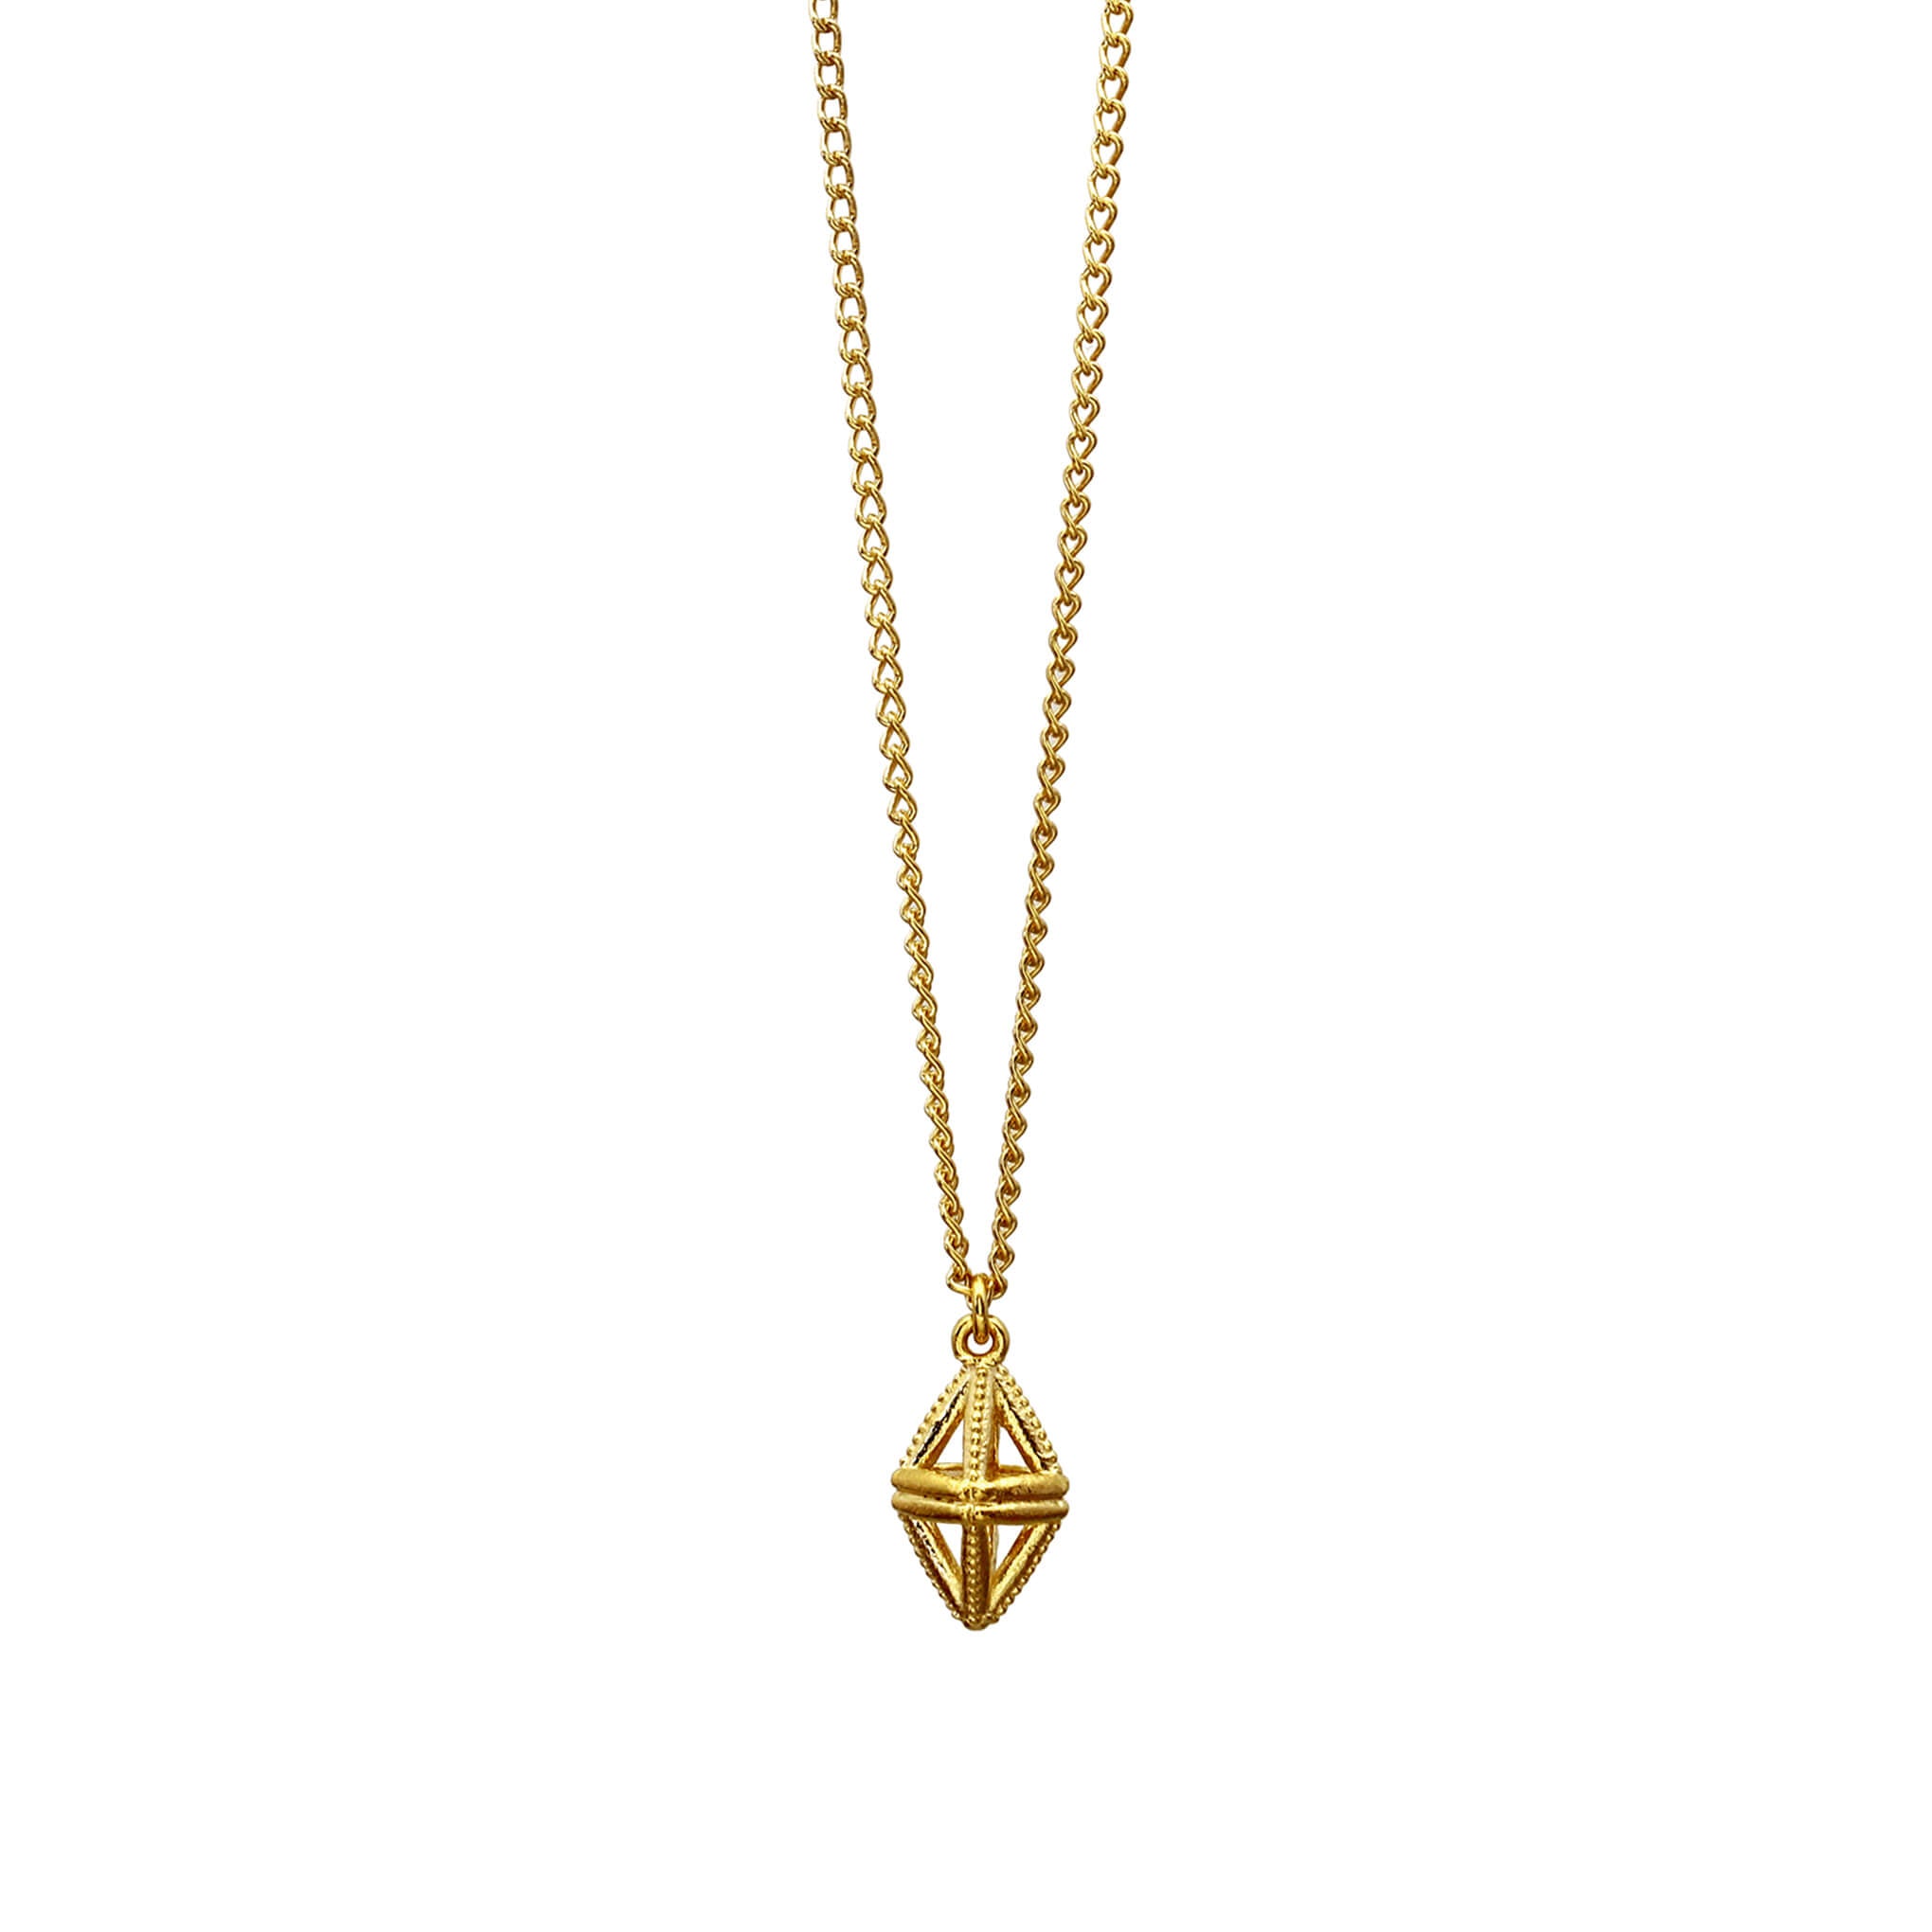 The 8 sided Mysid Charm Pendant Necklace in yellow gold